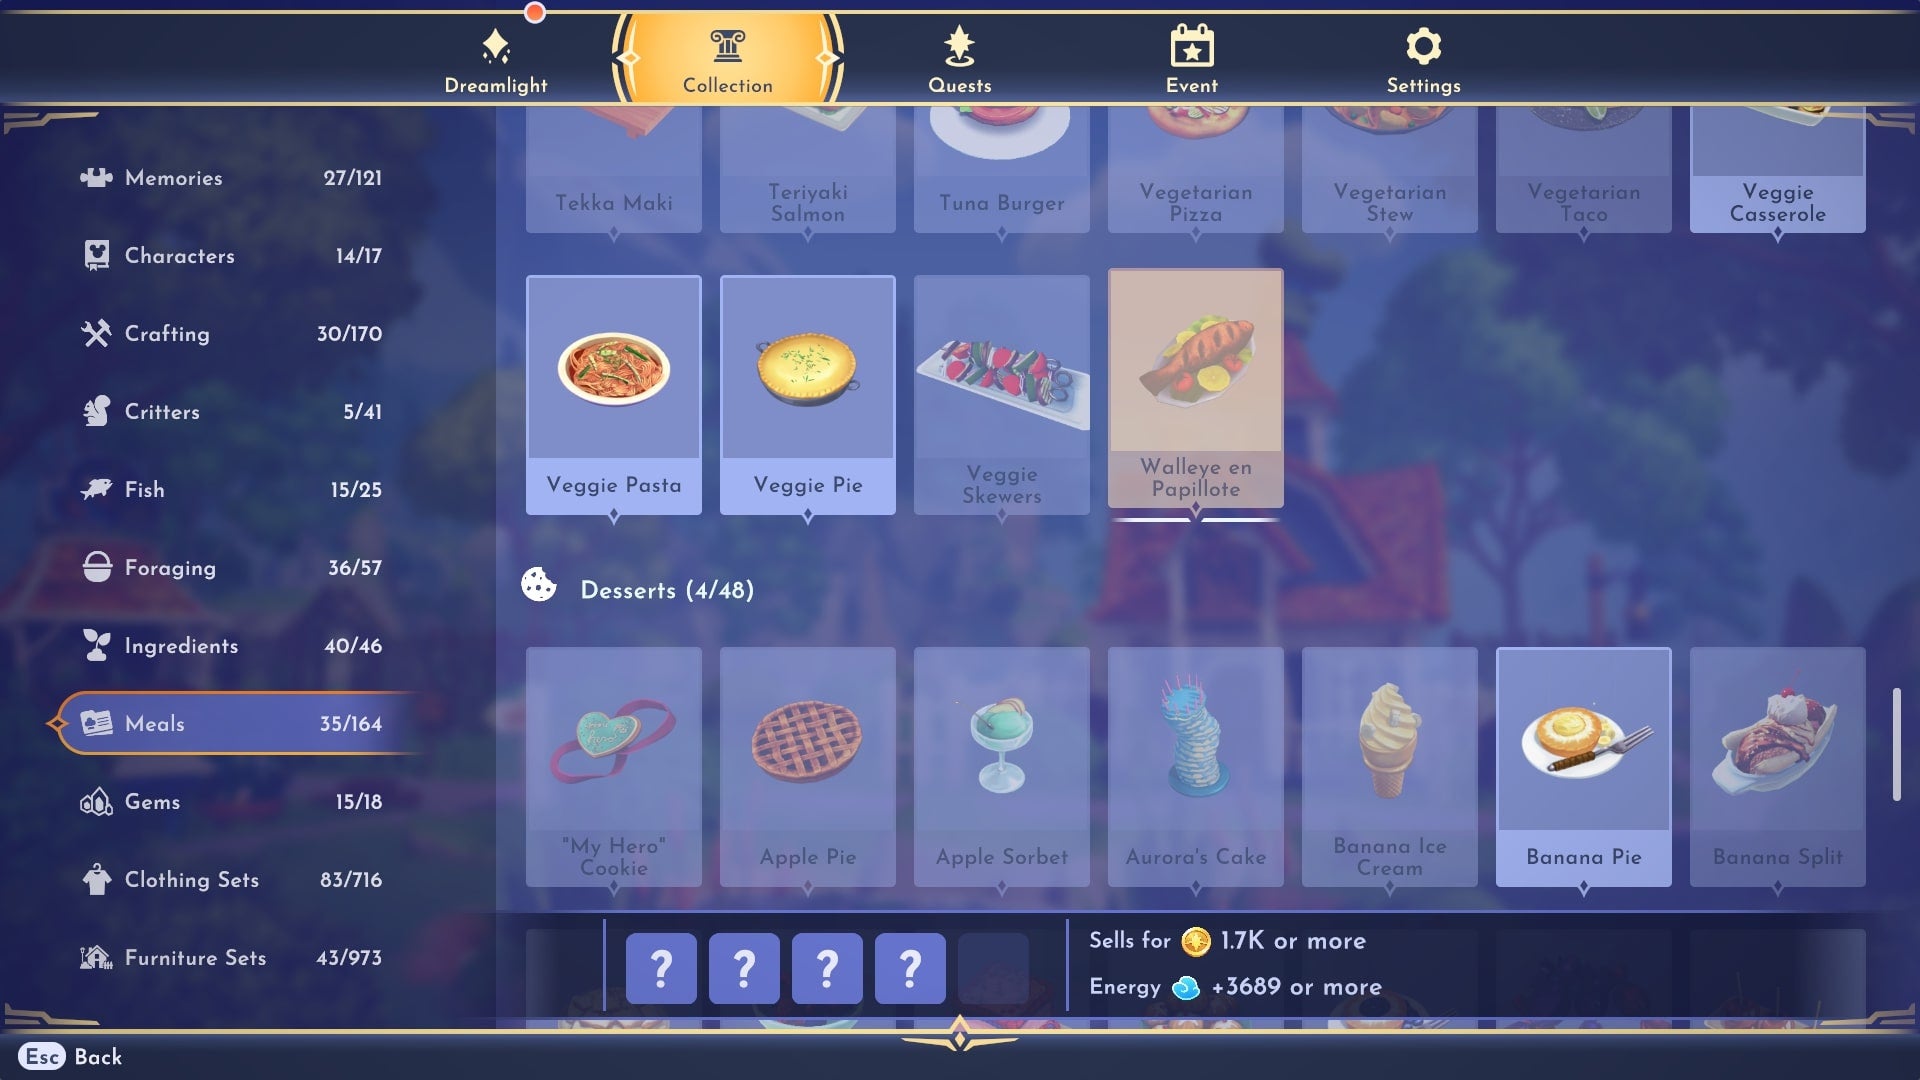 Walleye en Papillote, shown in the meals section of the collection menu in Disney Dreamlight Valley